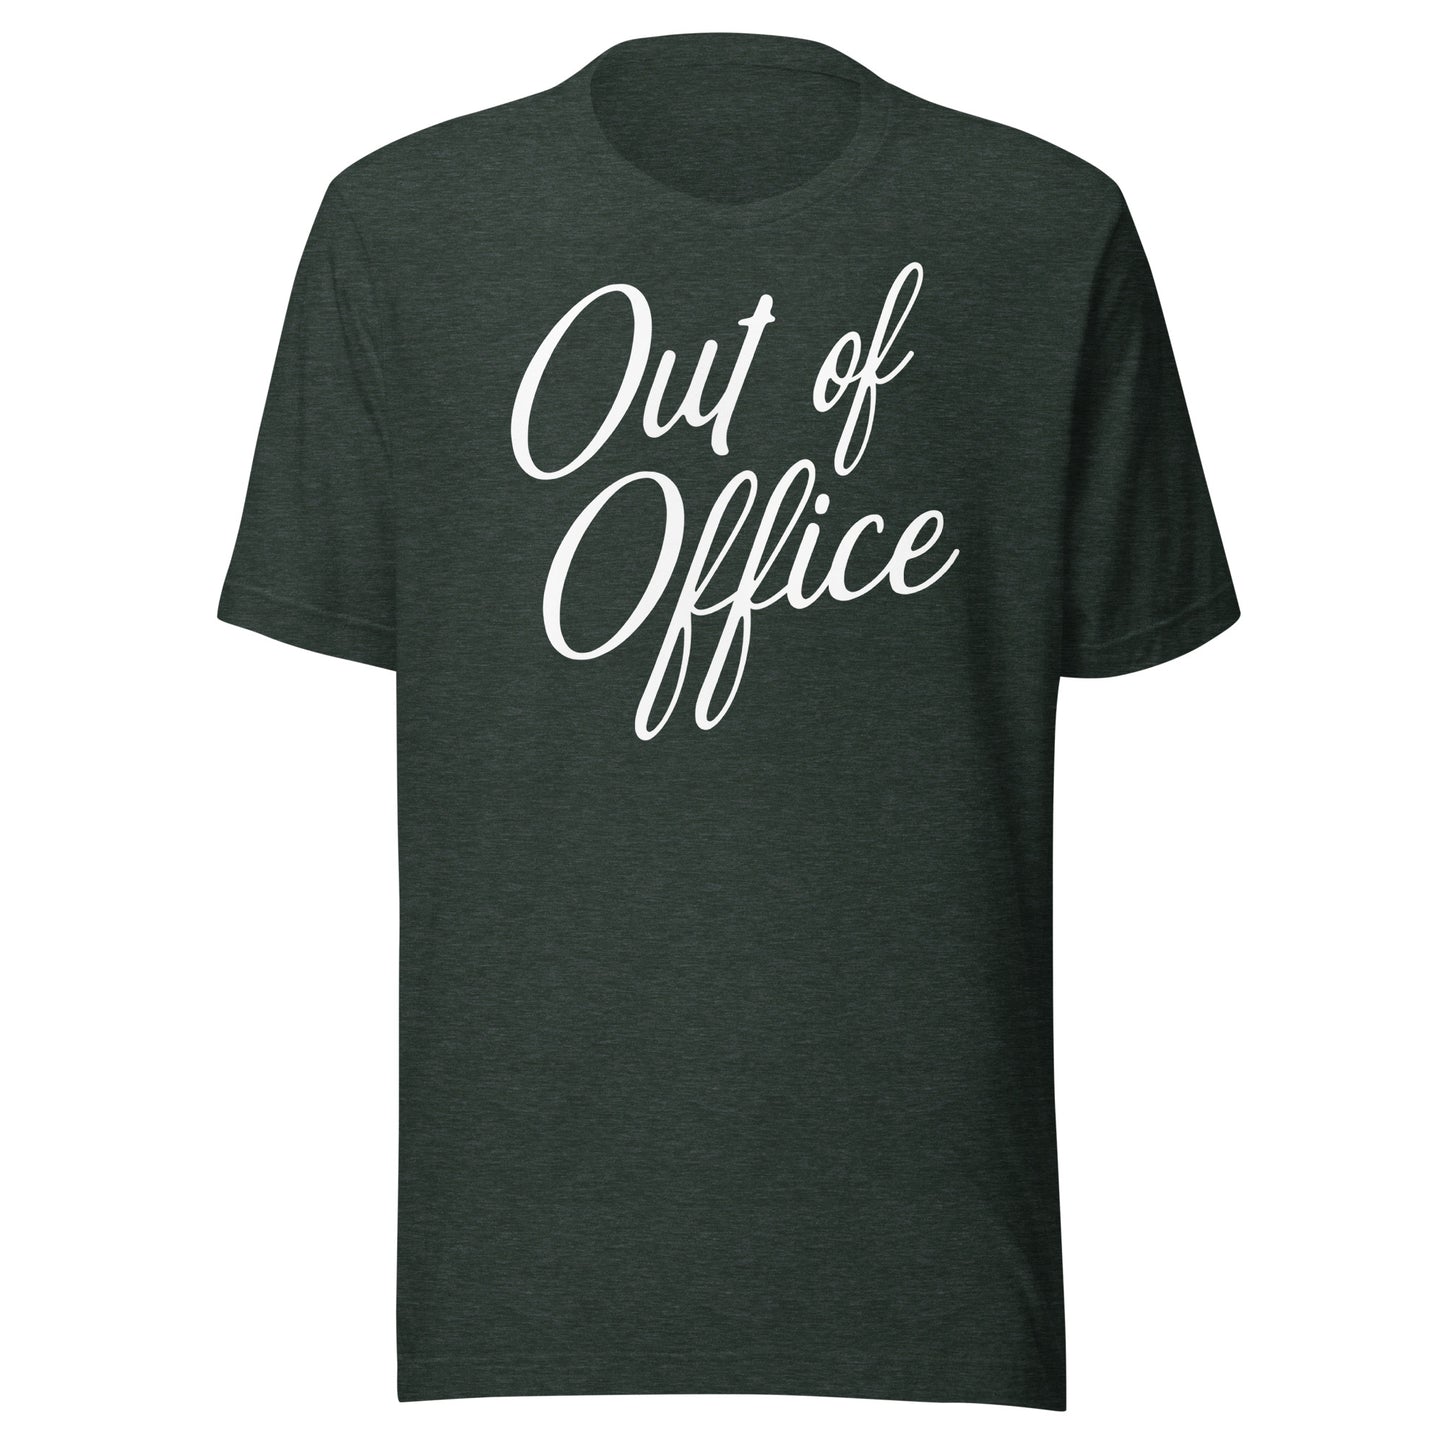 Out of Office T-Shirt for vacation